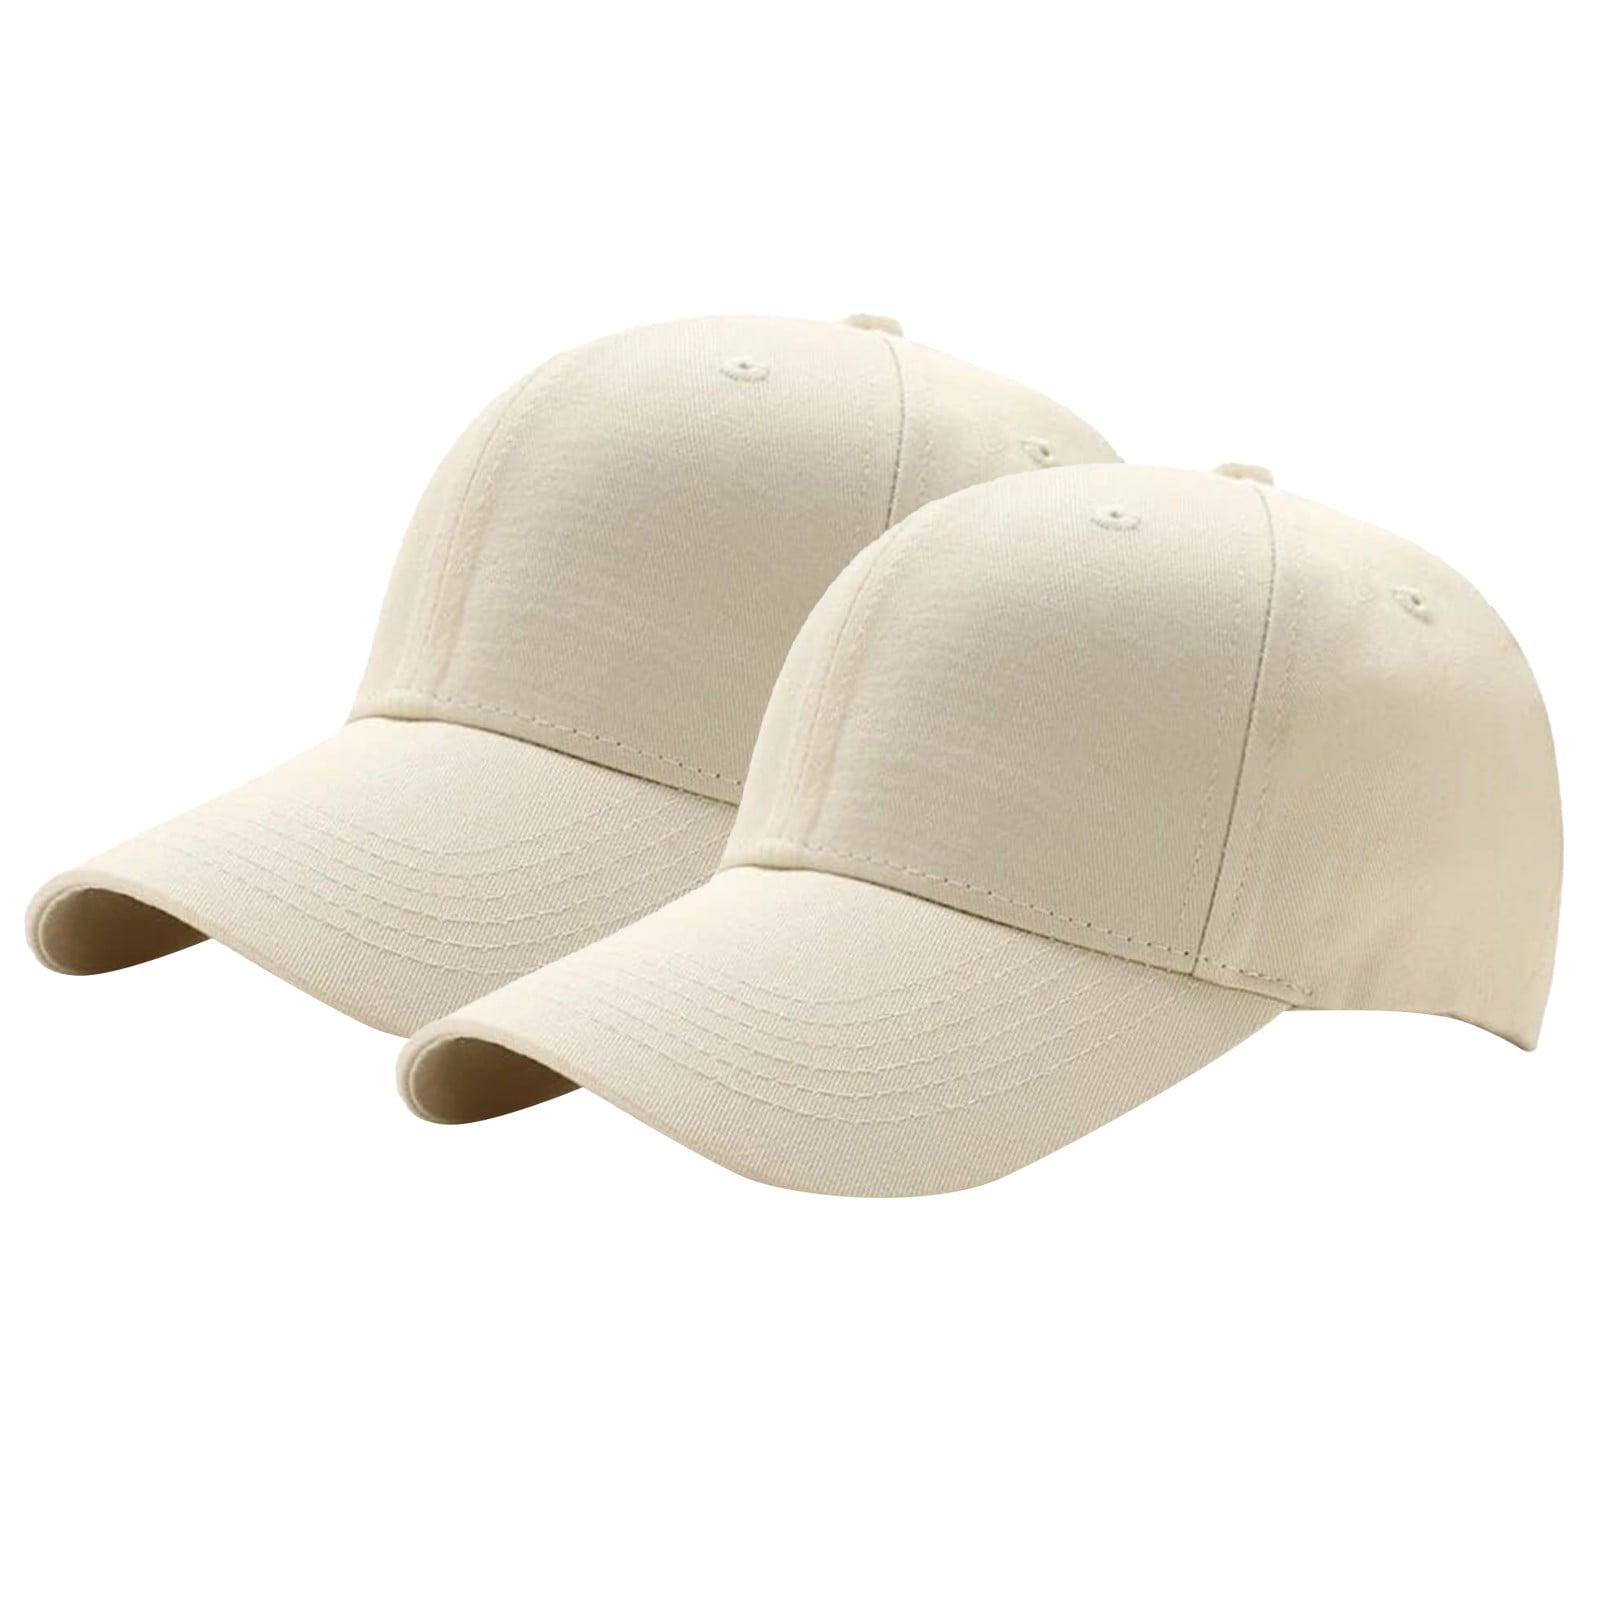 Womens Baseball Hats Volleyball Outdoor Caps for Men Athletic Cap